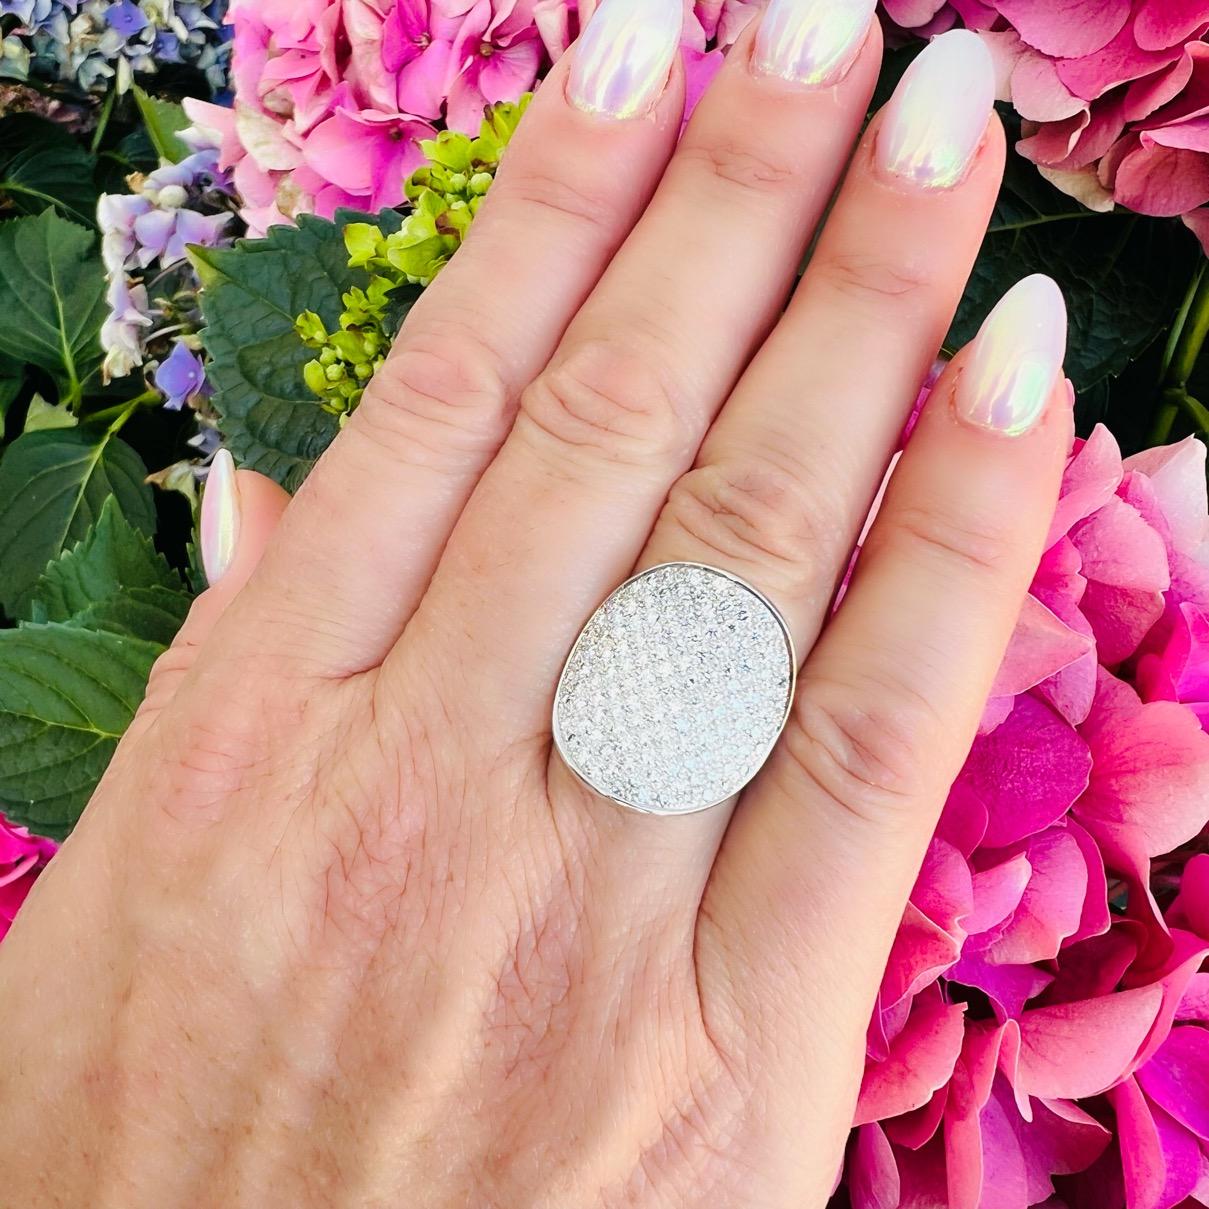 Bold, brilliant and sure to stop traffic, this Kreiger ring is a must have! Designed in 18k white gold, sculpted with a convex oval top pave-set with over 100 round brilliant-cut diamonds weighing 1.60 carats, D/VS quality, it catches the light as